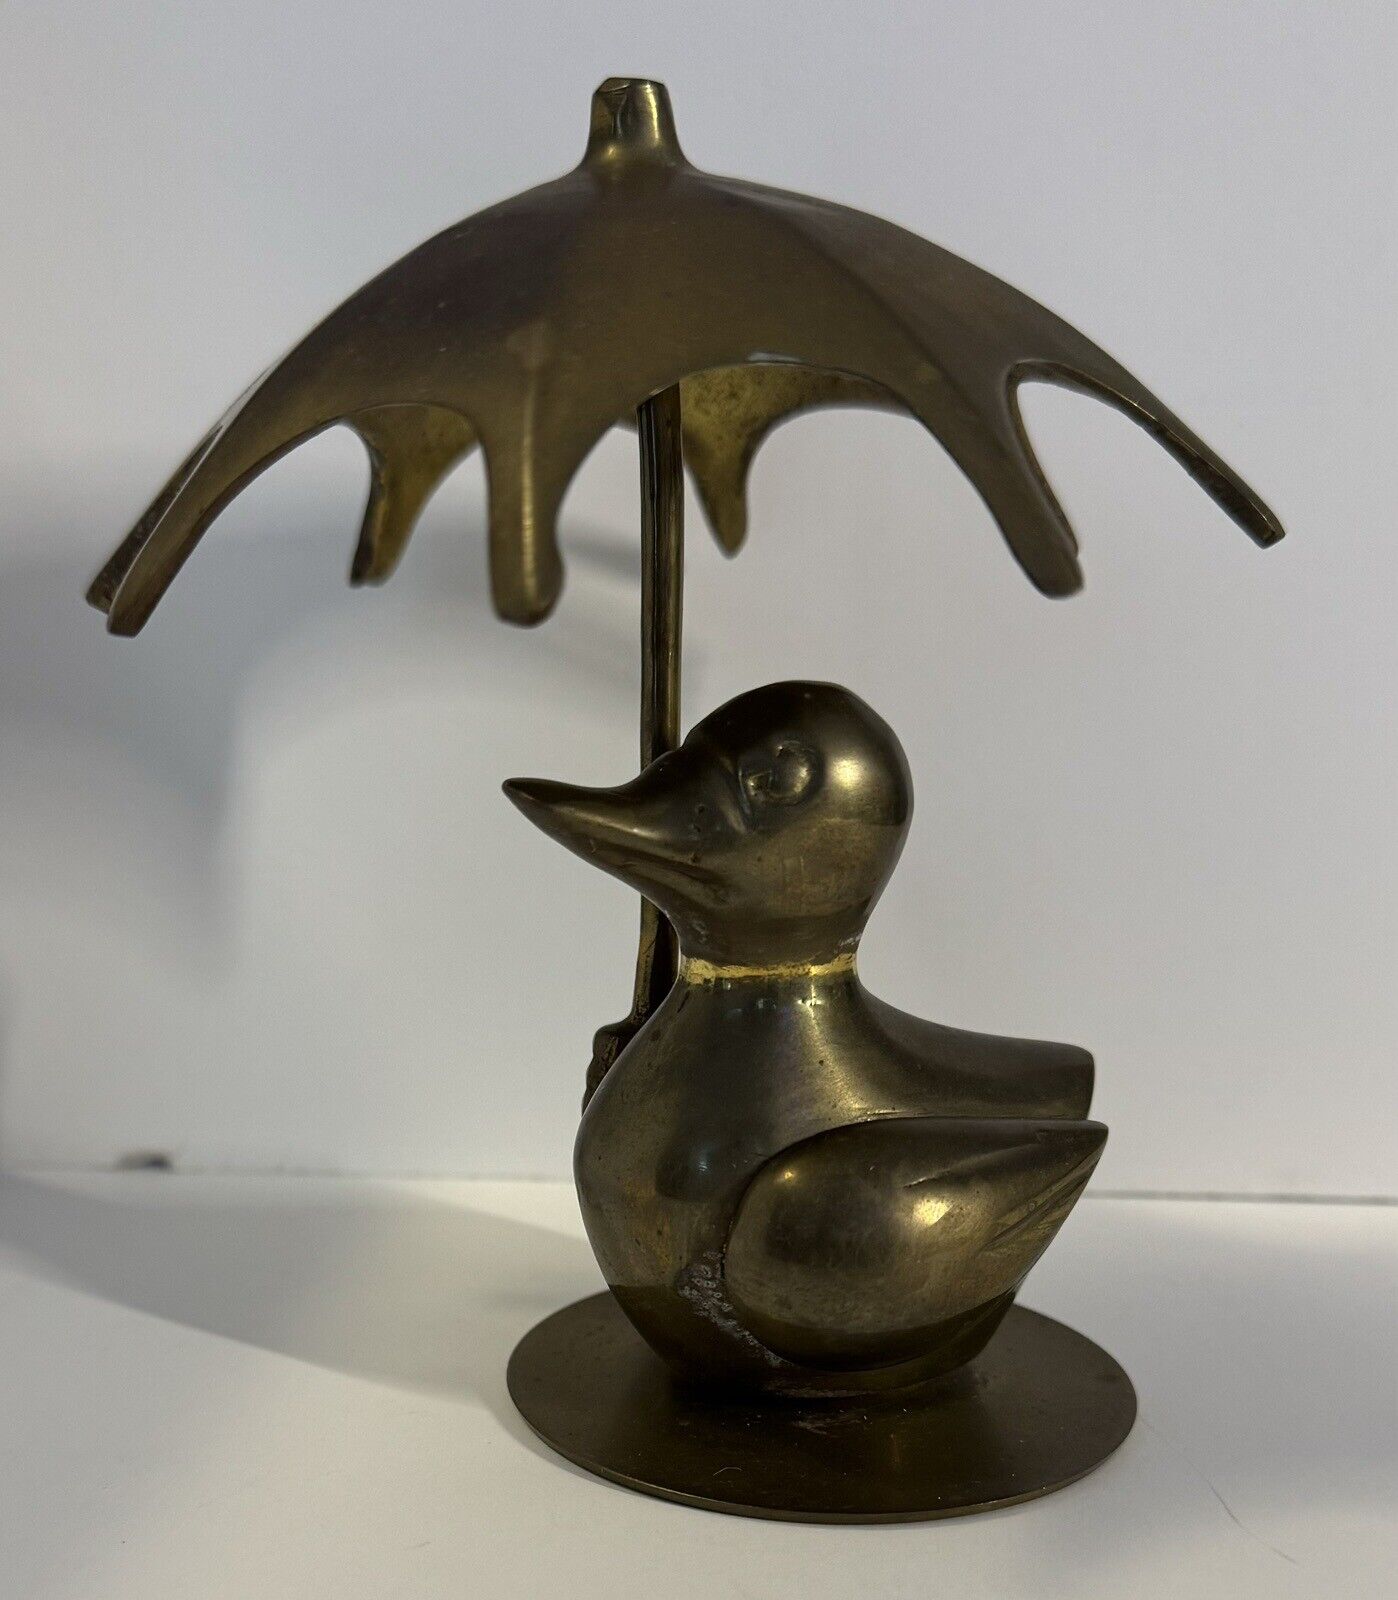 Brass Duck With Umbrella Figure Paperweight - Made in India